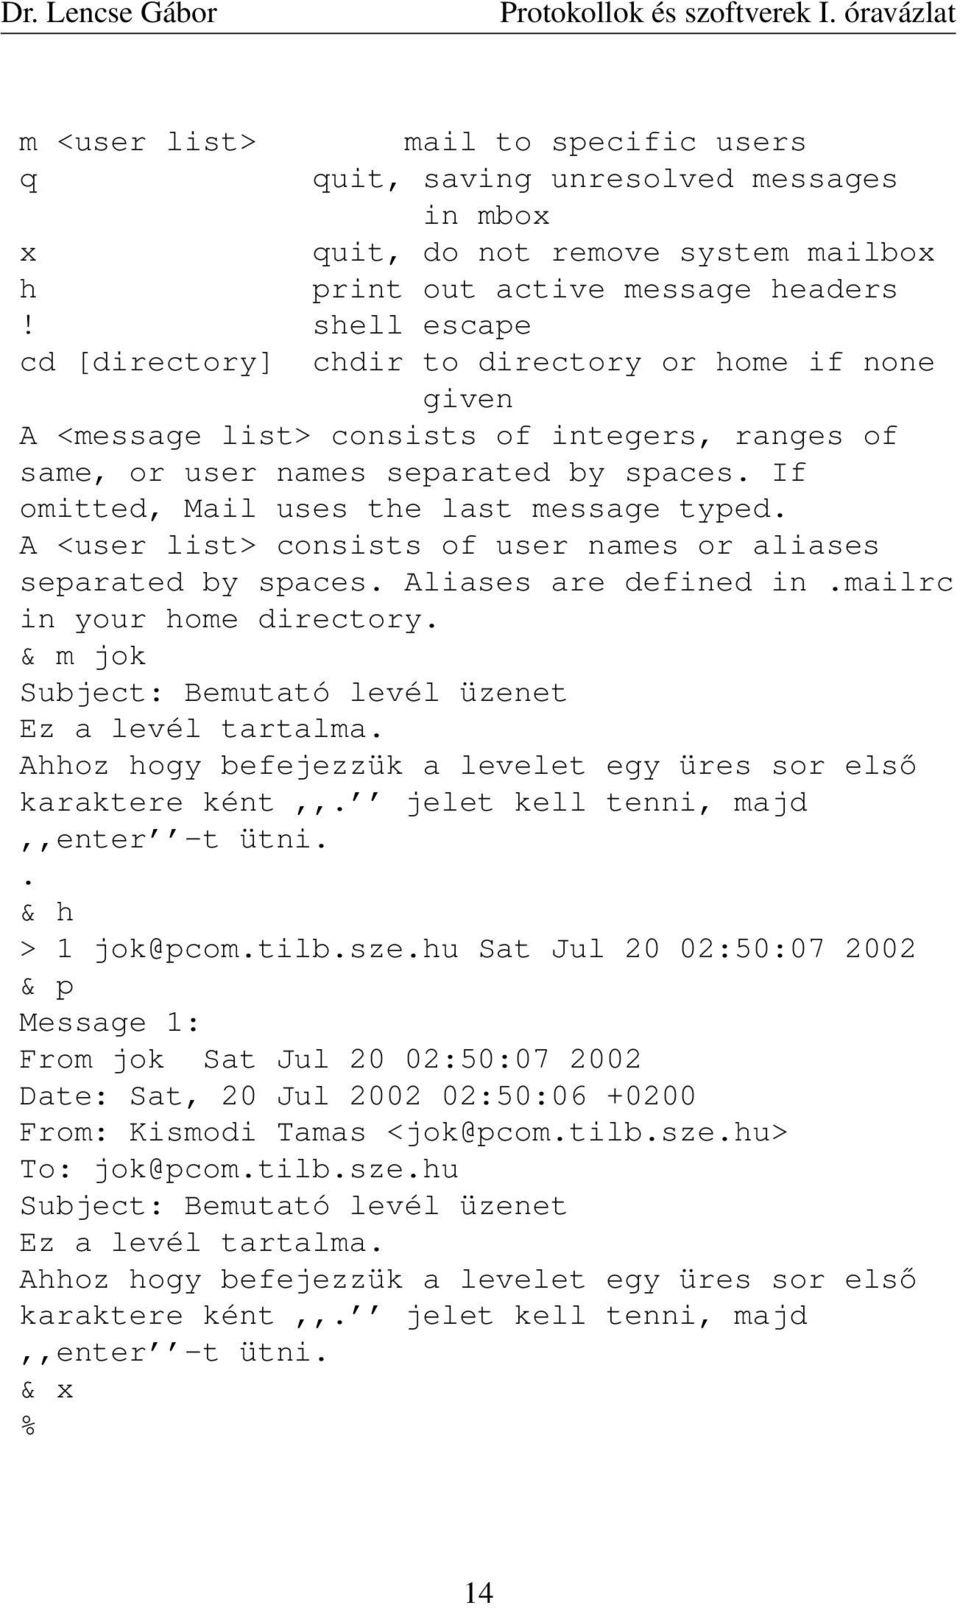 If omitted, Mail uses the last message typed. A <user list> consists of user names or aliases separated by spaces. Aliases are defined in.mailrc in your home directory.